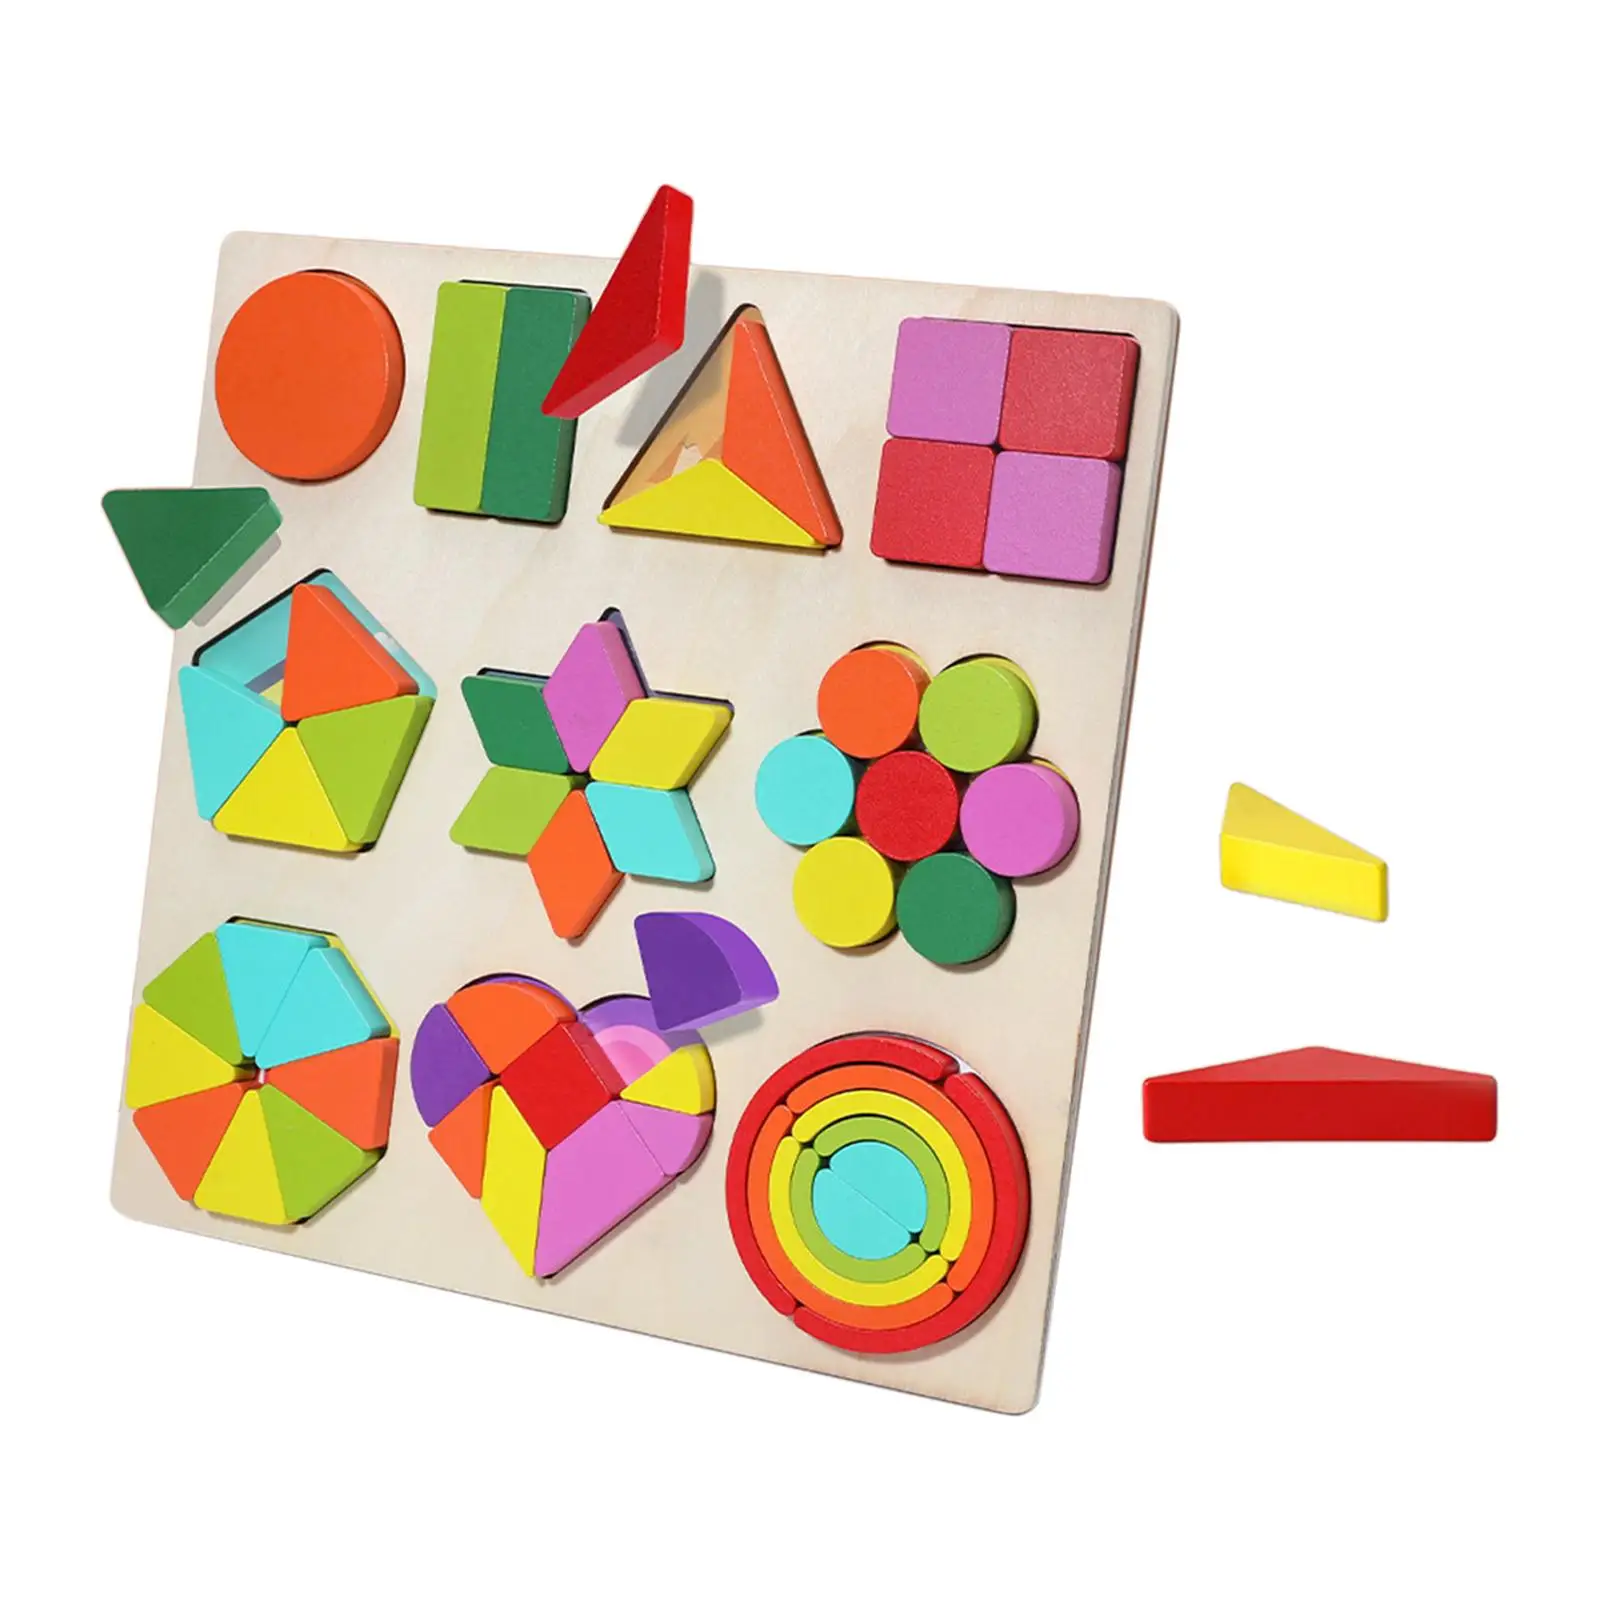 Wooden Wooden Puzzle Educational Developmental Toys Parent Child Game Geometric Manipulative Logical Skills Montessori Toddlers